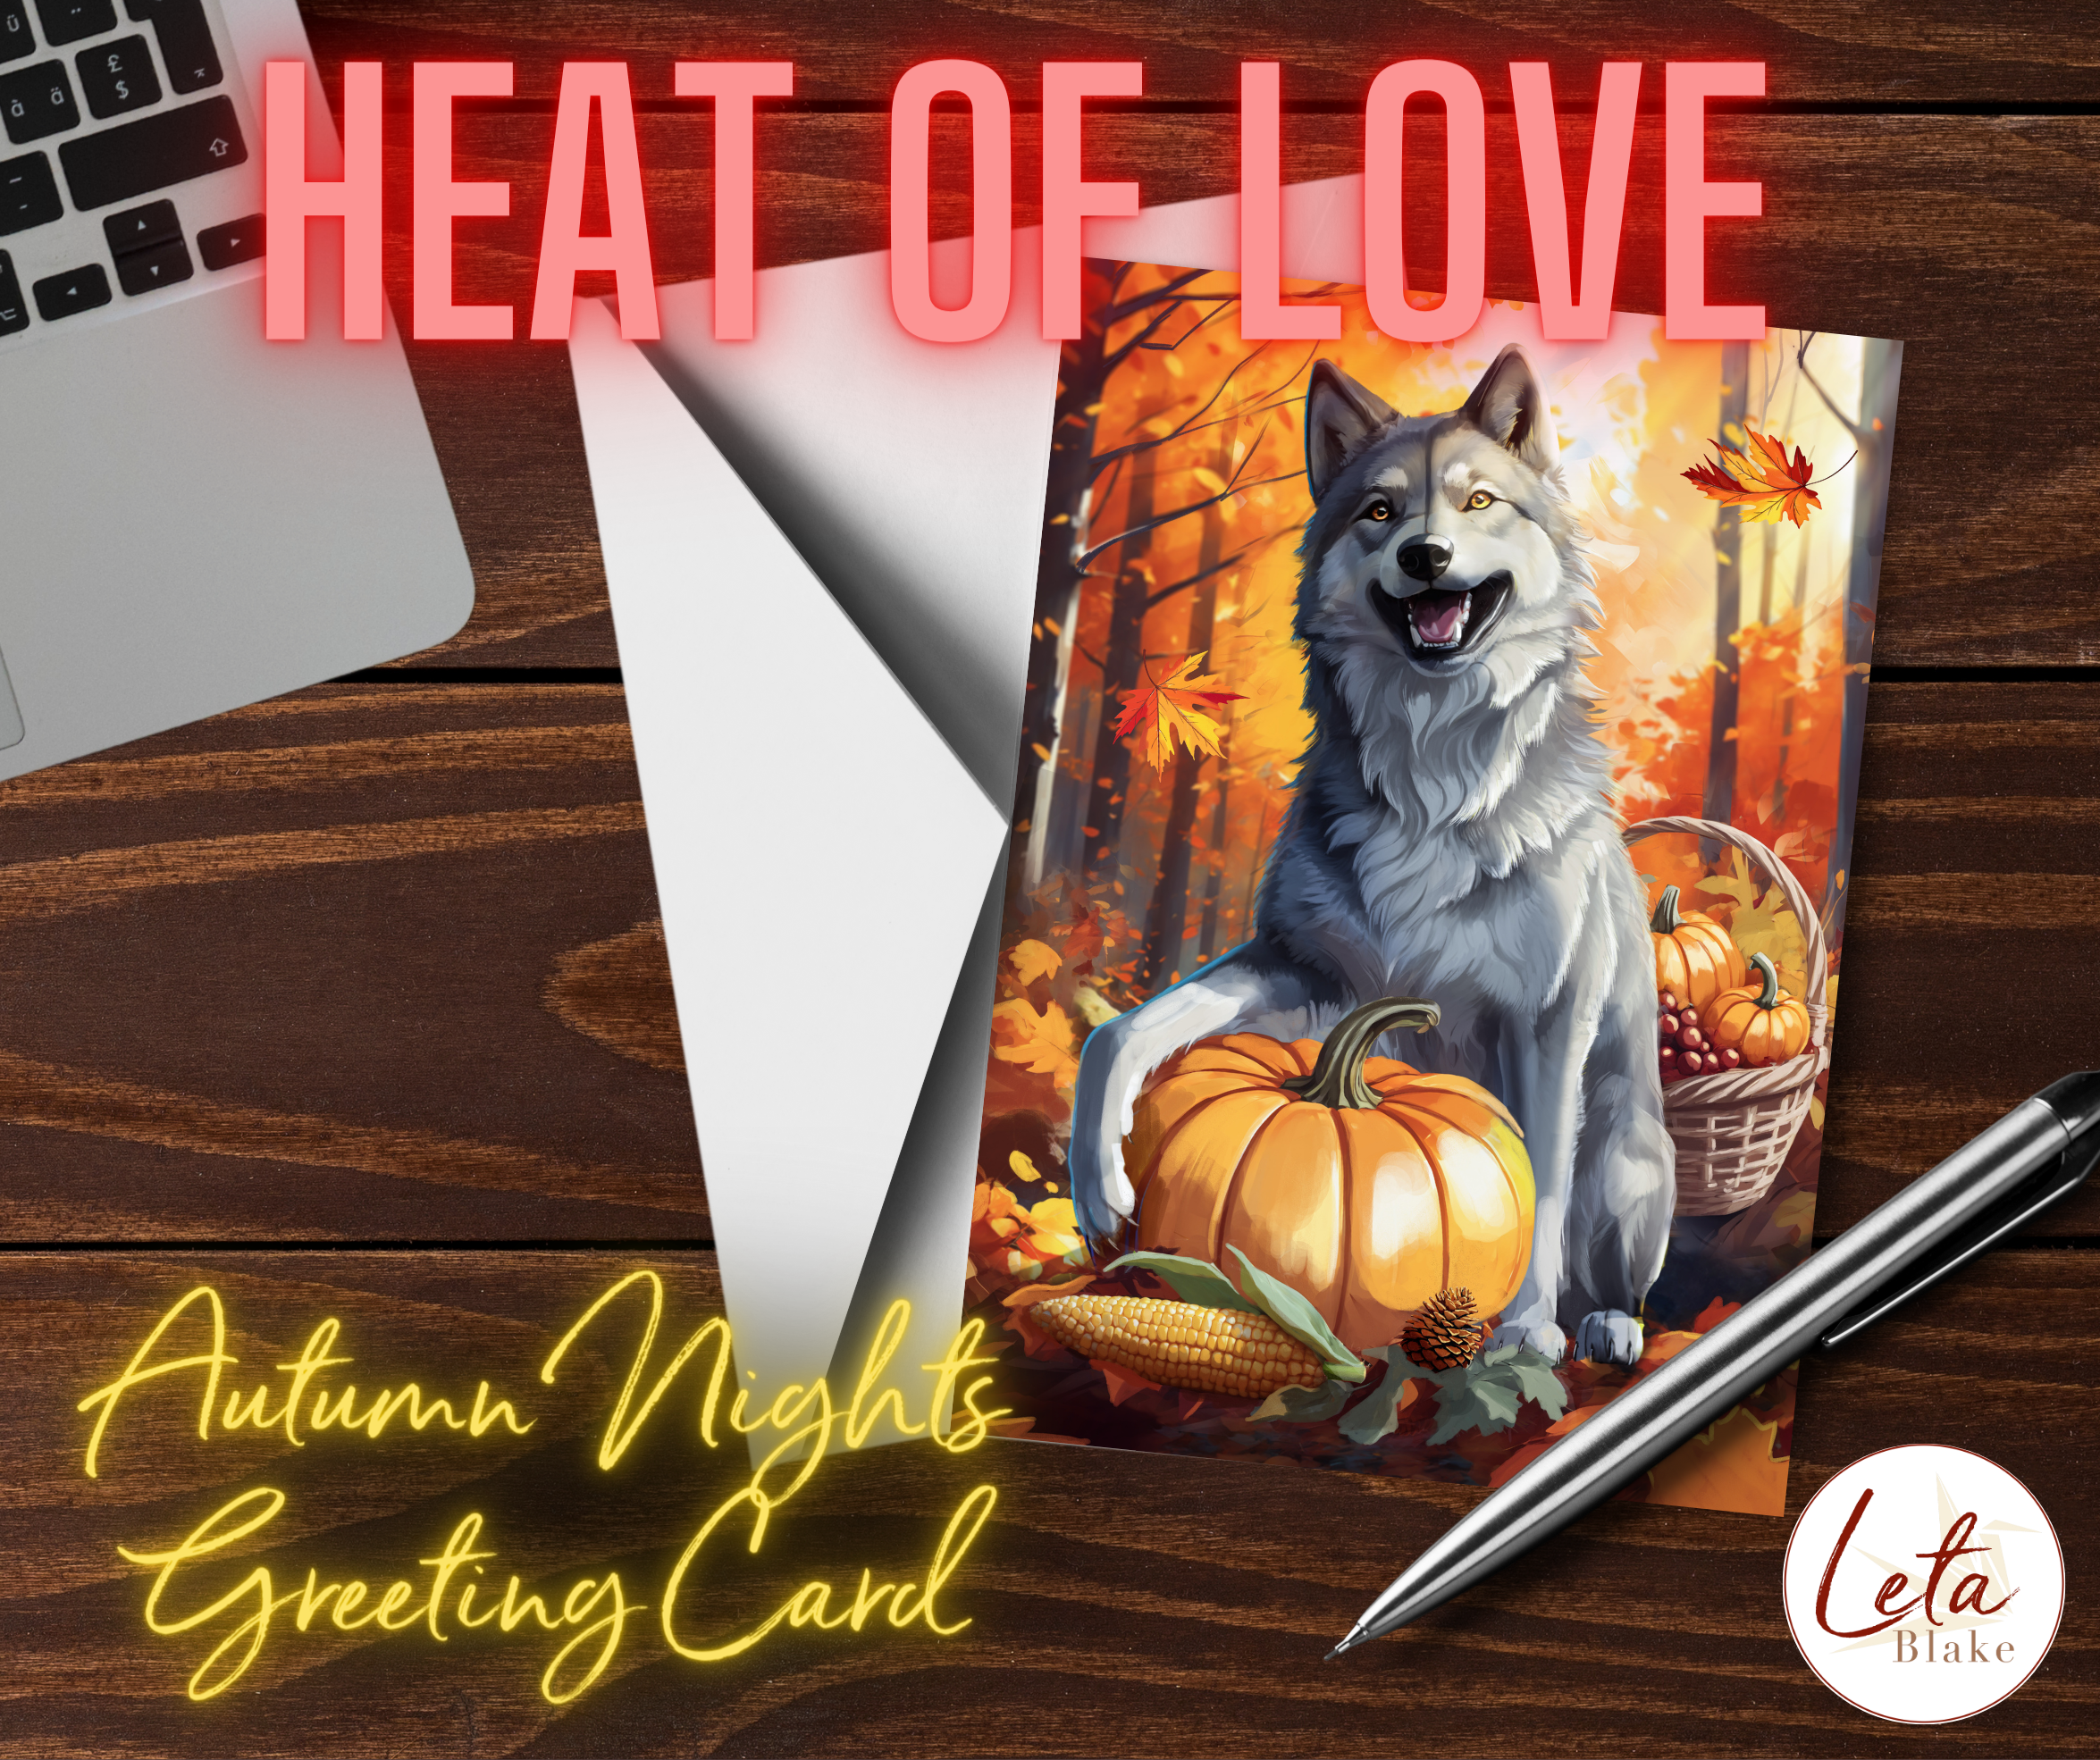 Card and envelope on dark wooden desk top with a silver pen and laptop. Card image is a smiling grey wolf with pumpkin, corn, other harvest vegetables. Image text says "Heat of Love" and "Autumn Nights Greeting Card"